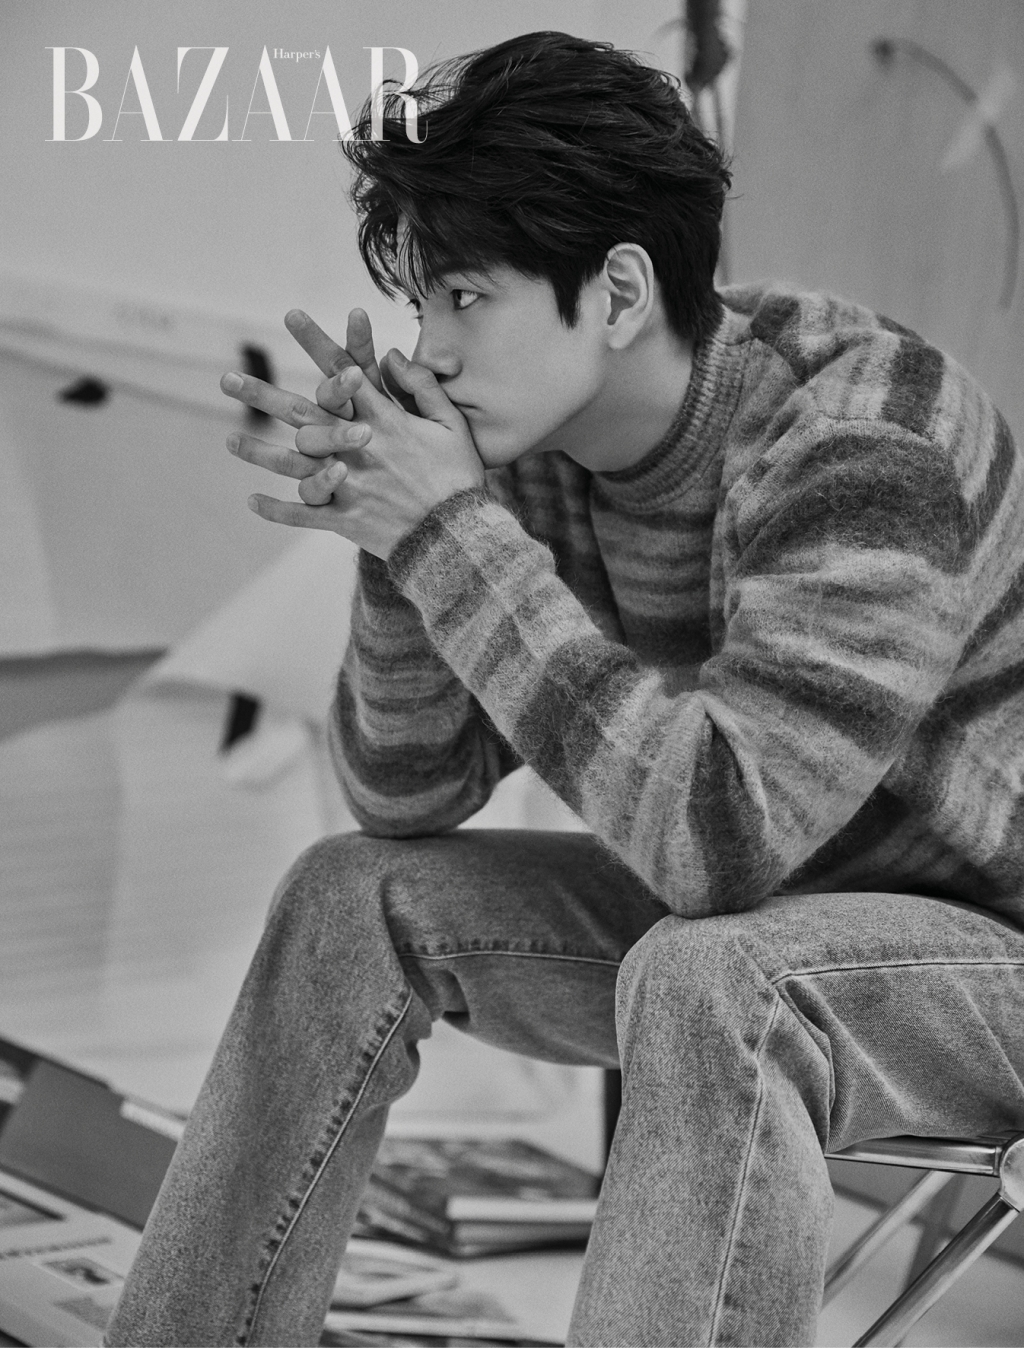 Ong Seong-wu, who had a successful Acting Hazing with JTBC Drama Eighteen Moments, decorated the picture of the December issue of the bazaar.Ong Seong-wu agency Fantasy O released Ong Seong-wus fashion picture on the 15th.This picture was based on the concept of the freedom of the youth star River Phoenix in the 90s, in line with the move of Ong Seong-wu, who is challenging the movie with Life is beautiful after finishing 18 moments.Ong Seong-wu in the public picture took control of the scene with a vintage T-shirt, jeans, sneakers lightly, and a pose and deep eyes that naturally spewed out.In a series of interviews, he said, The 18 Moments scene was really comfortable. It opened me and made me more visible.I could not show it as much as I thought, and I could have time to think constantly so that I could do it next time.It was a clue to the future direction, he said.I try to draw my image of being in my thirties and Acting. I have a dream that I want to make a good act when I have an active growth and become a person.So I want to play various roles next year. 